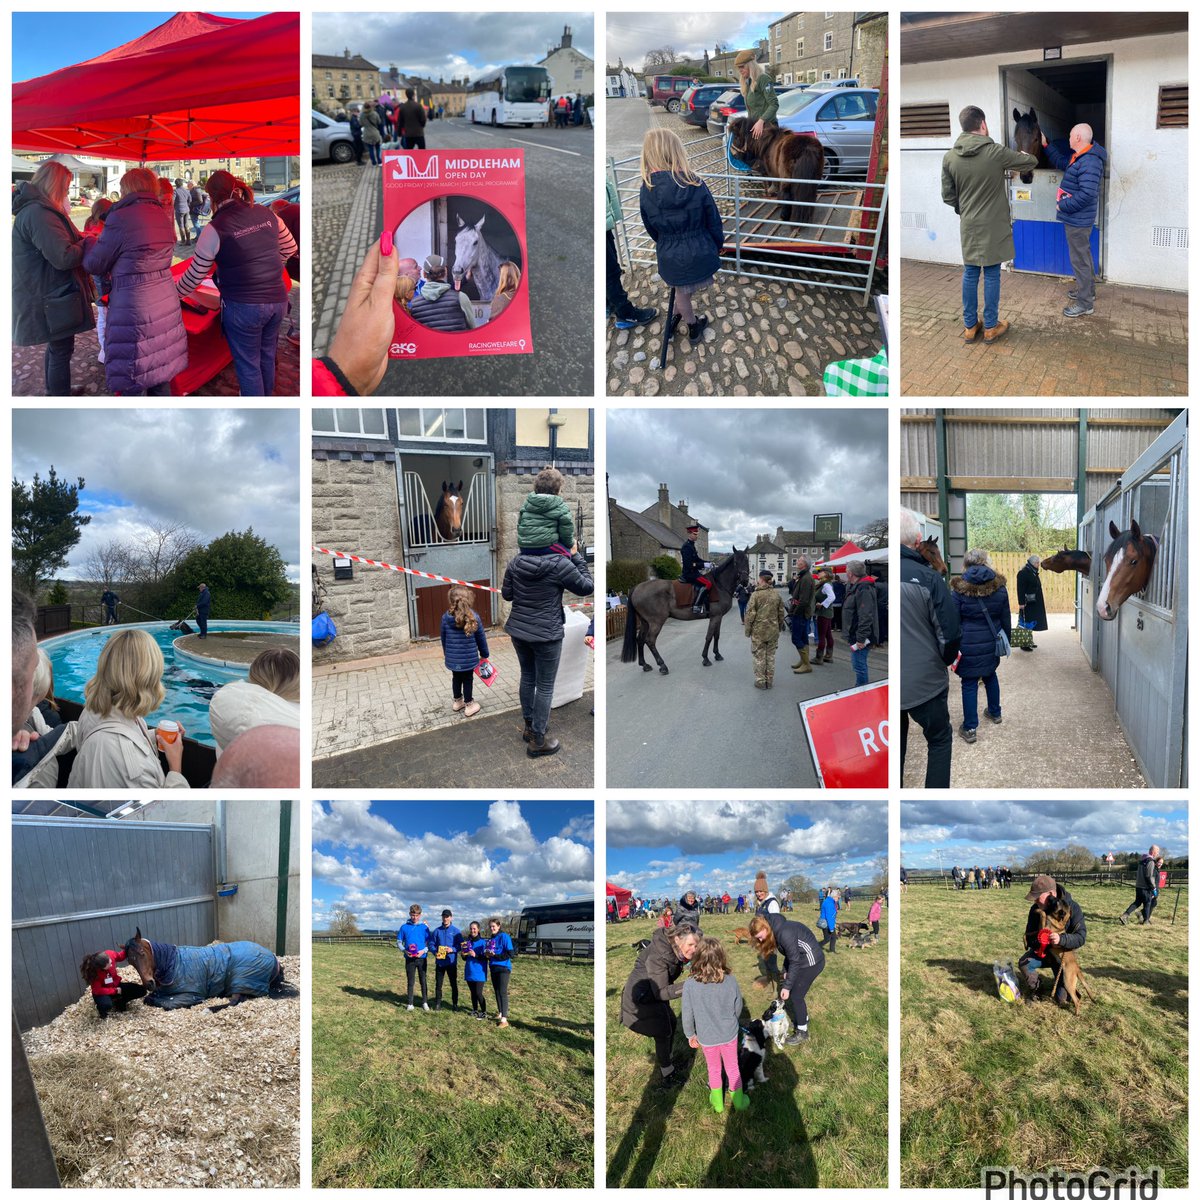 We would like to say a big thank you to everyone who came out today for the ARC Middleham Open Day and supported Racing Welfare. It was so great to see so many people visiting the open yards and attending the afternoon activities on the Low Moor. #MiddlehamOpenDay